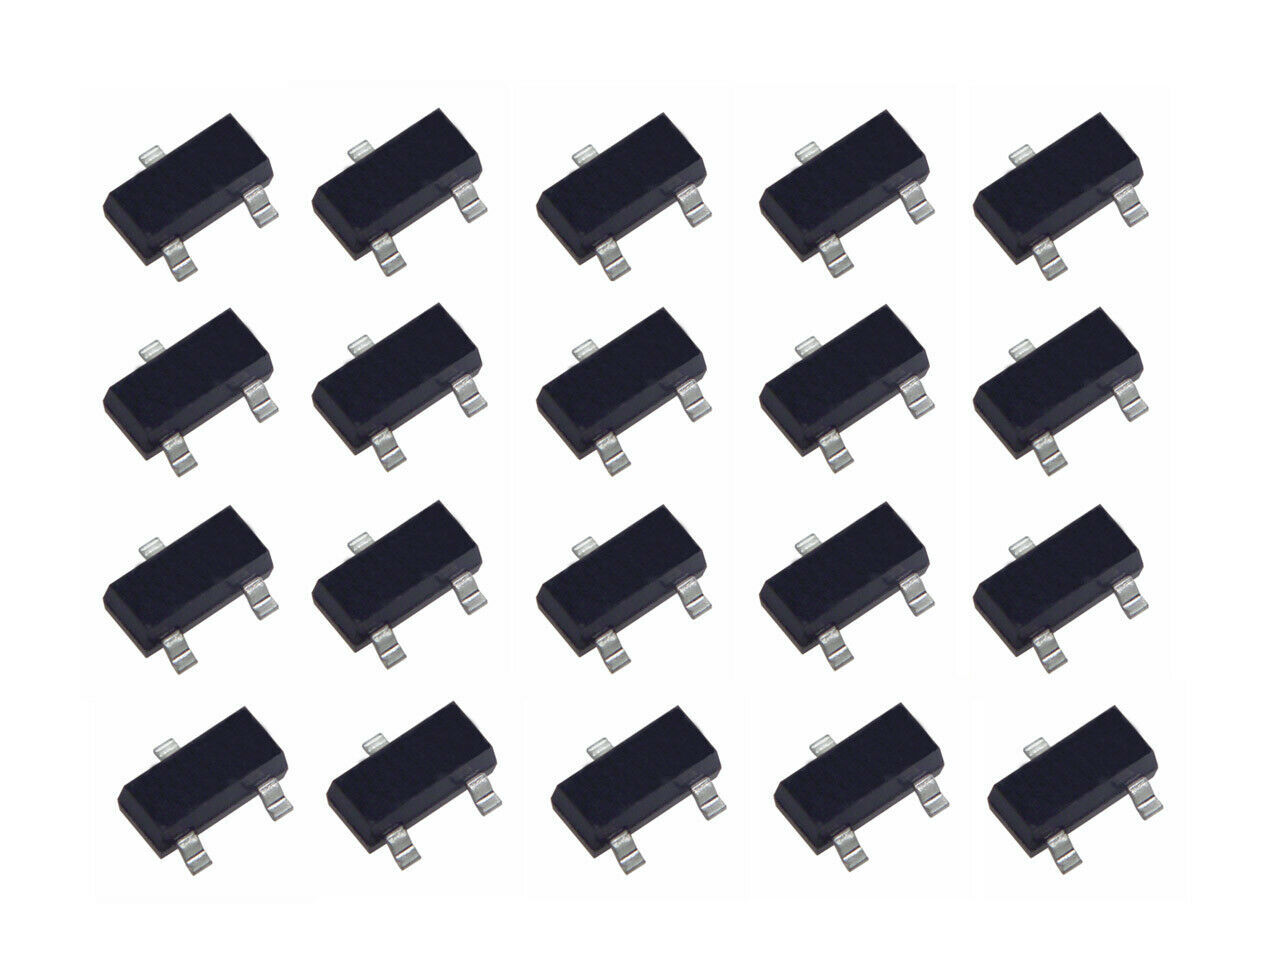 Primary image for 20 Pcs Pack Lot SOT-23 Triode Transistor SMD XC6206P152MR XC6206P152 65E9 ZJ SOT